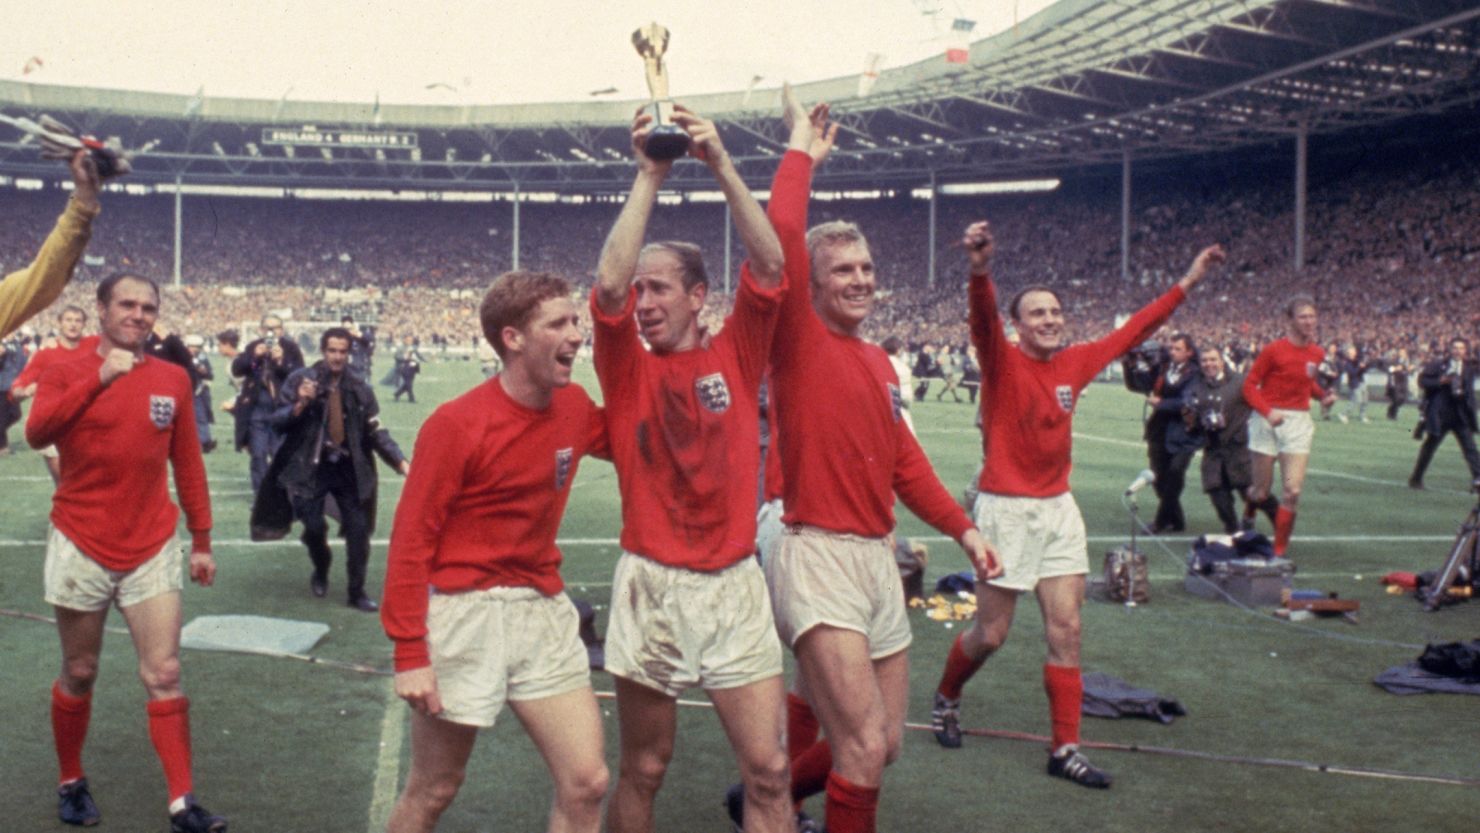 Bobby Charlton raises the Jules Rimet trophy in the air  following England's 4-2 victory after extra time over West Germany in the World Cup Final at Wembley Stadium, 30th July 1966. Amongst his team mates celebrating with him are goalkeeper Gordon Banks, Alan Ball on his right and team captain Bobby Moore (1941 - 1993) at his left.